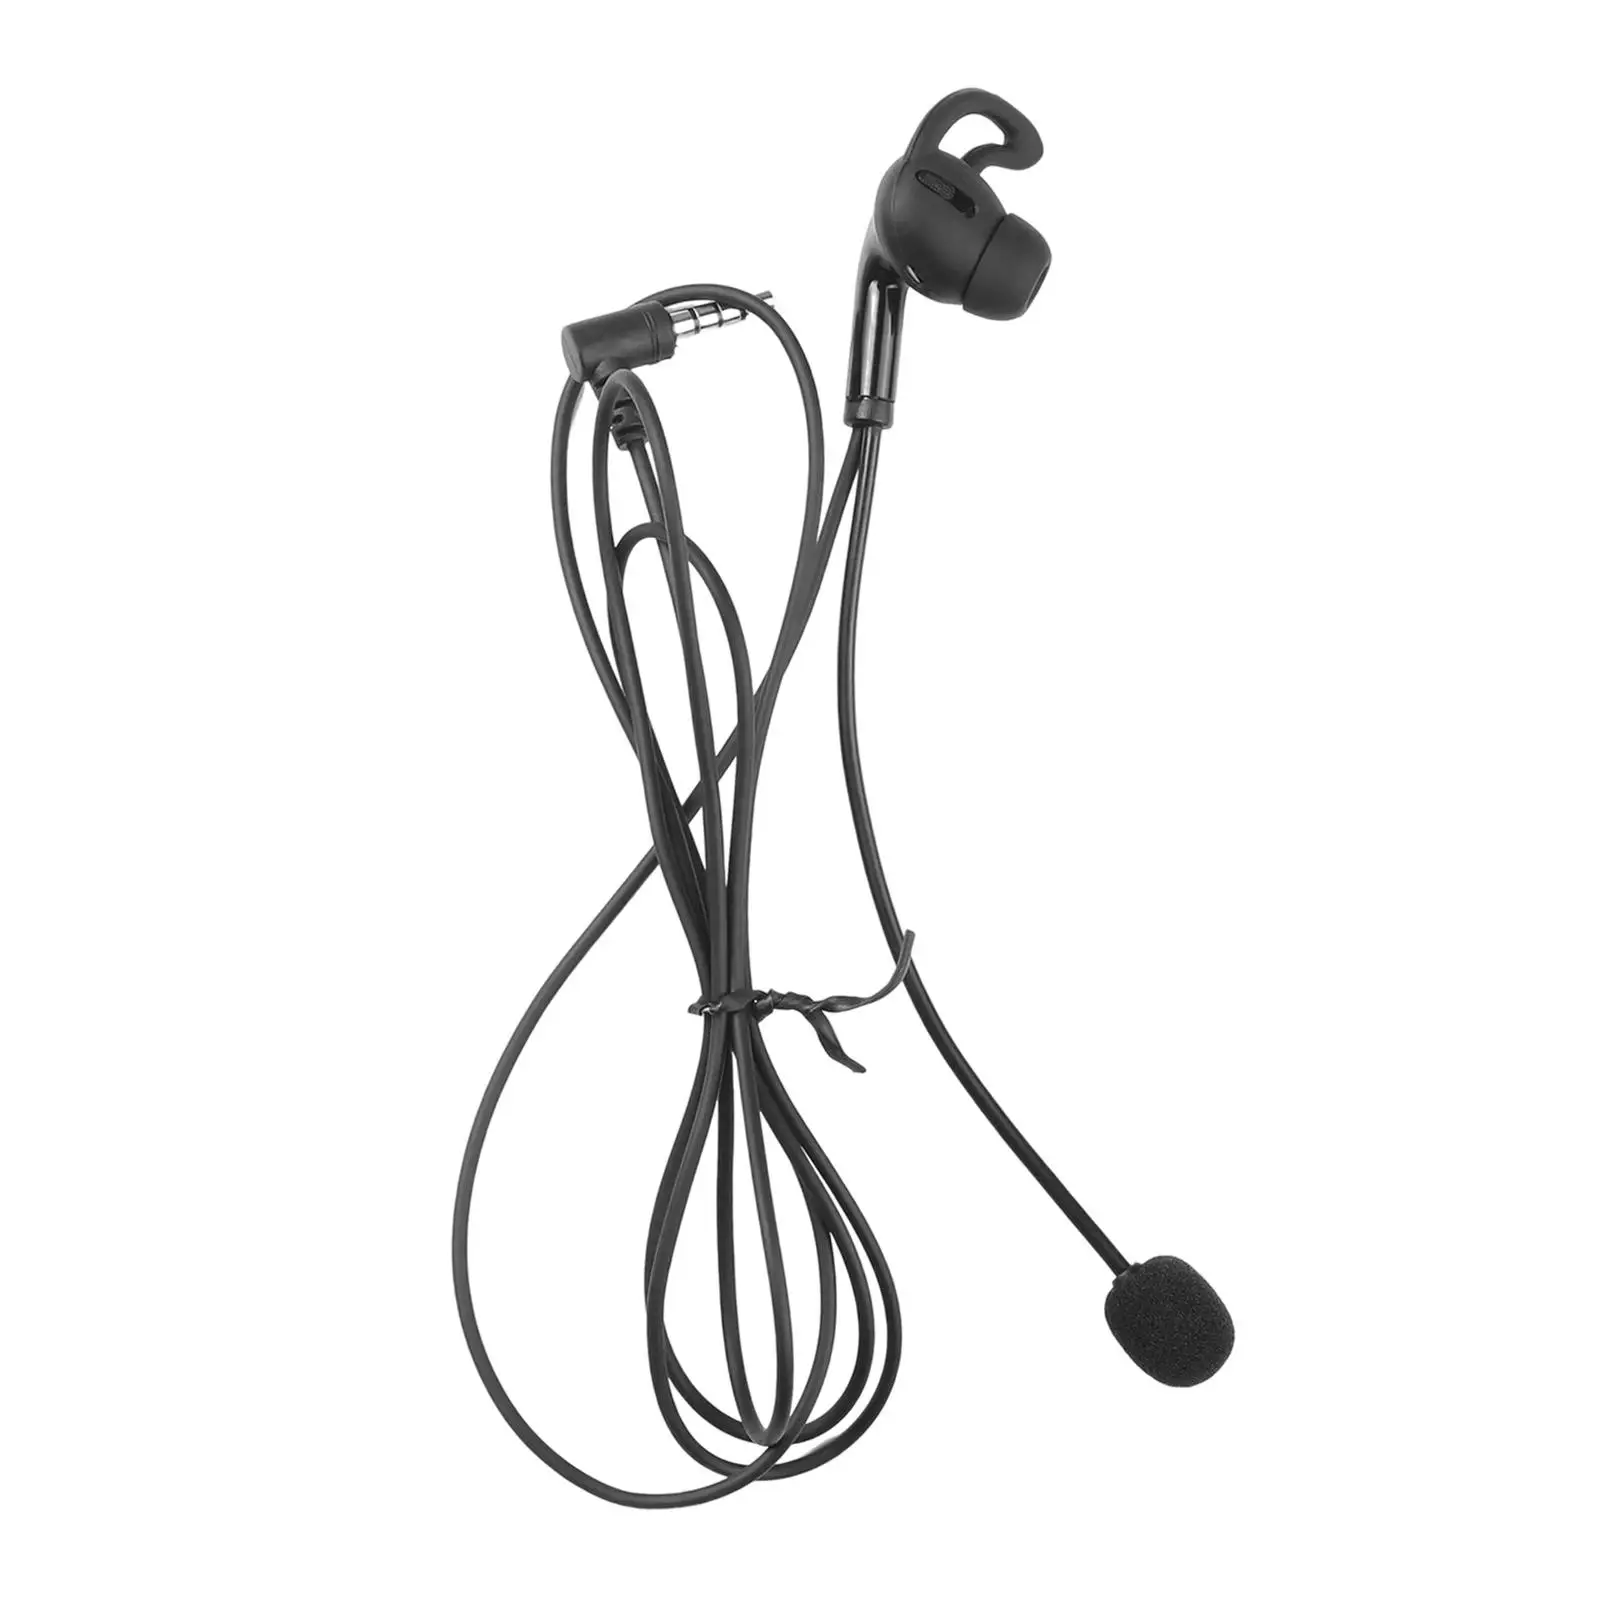 Referee Single Ear Earphone Wired Professional Remote In-Ear Earphones Headset Durable USB Earbuds for Phones Driver